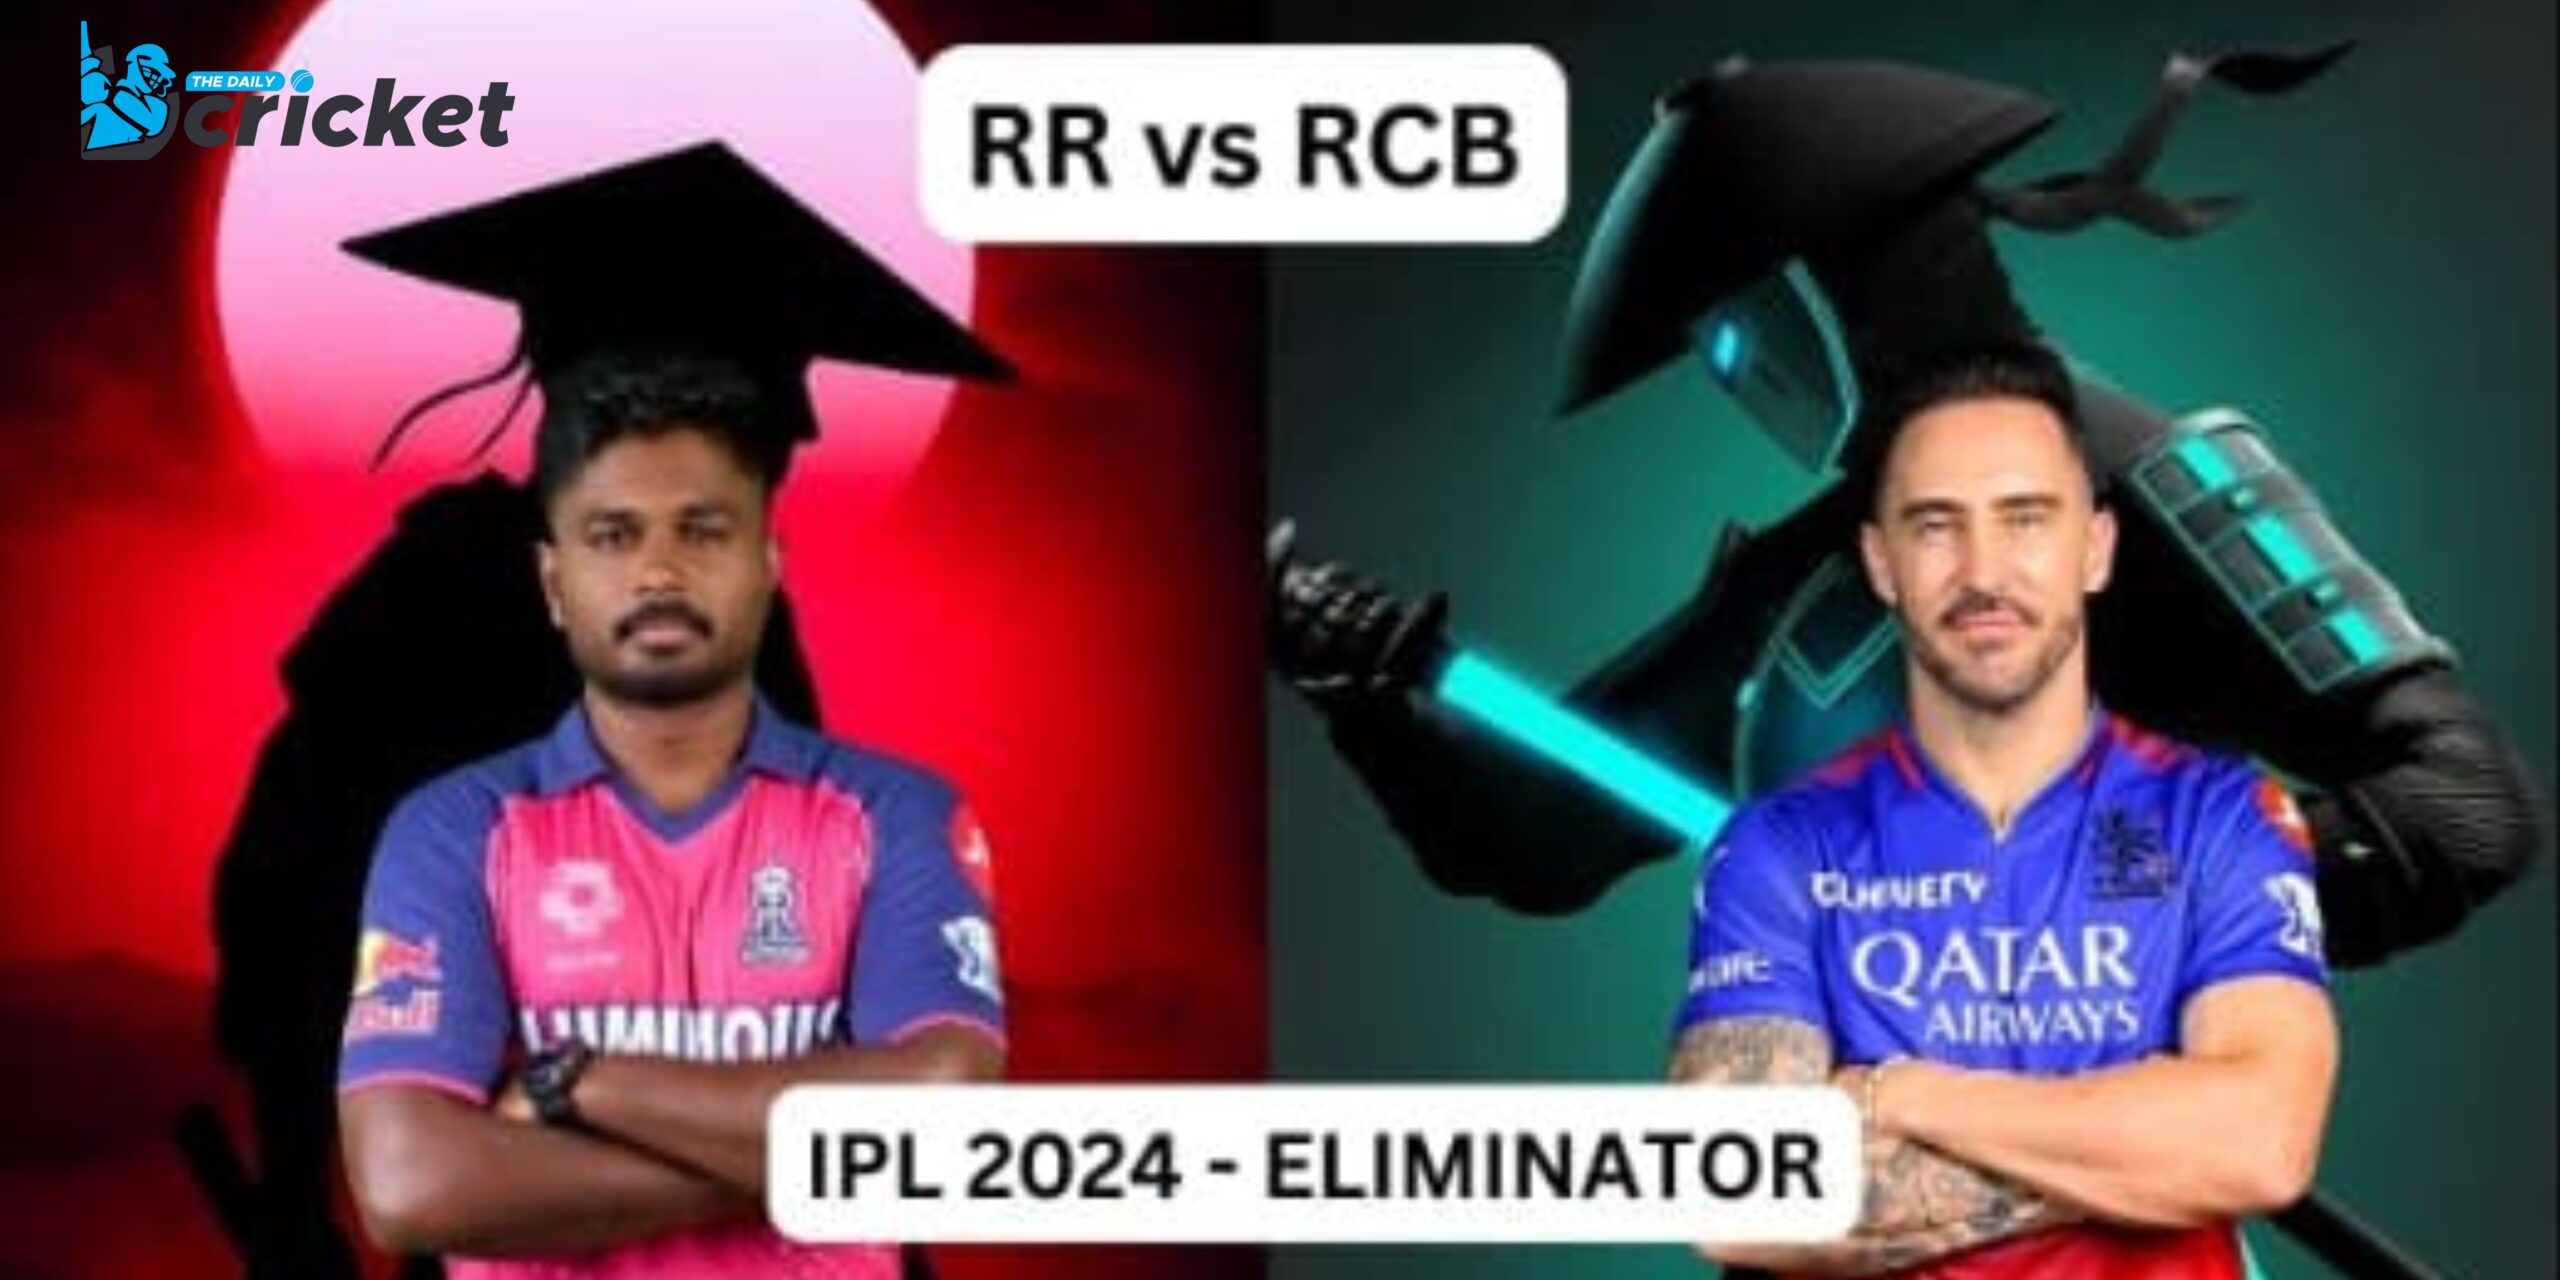 RR VS RCB Eliminator, IPL Match Today: Who will win?